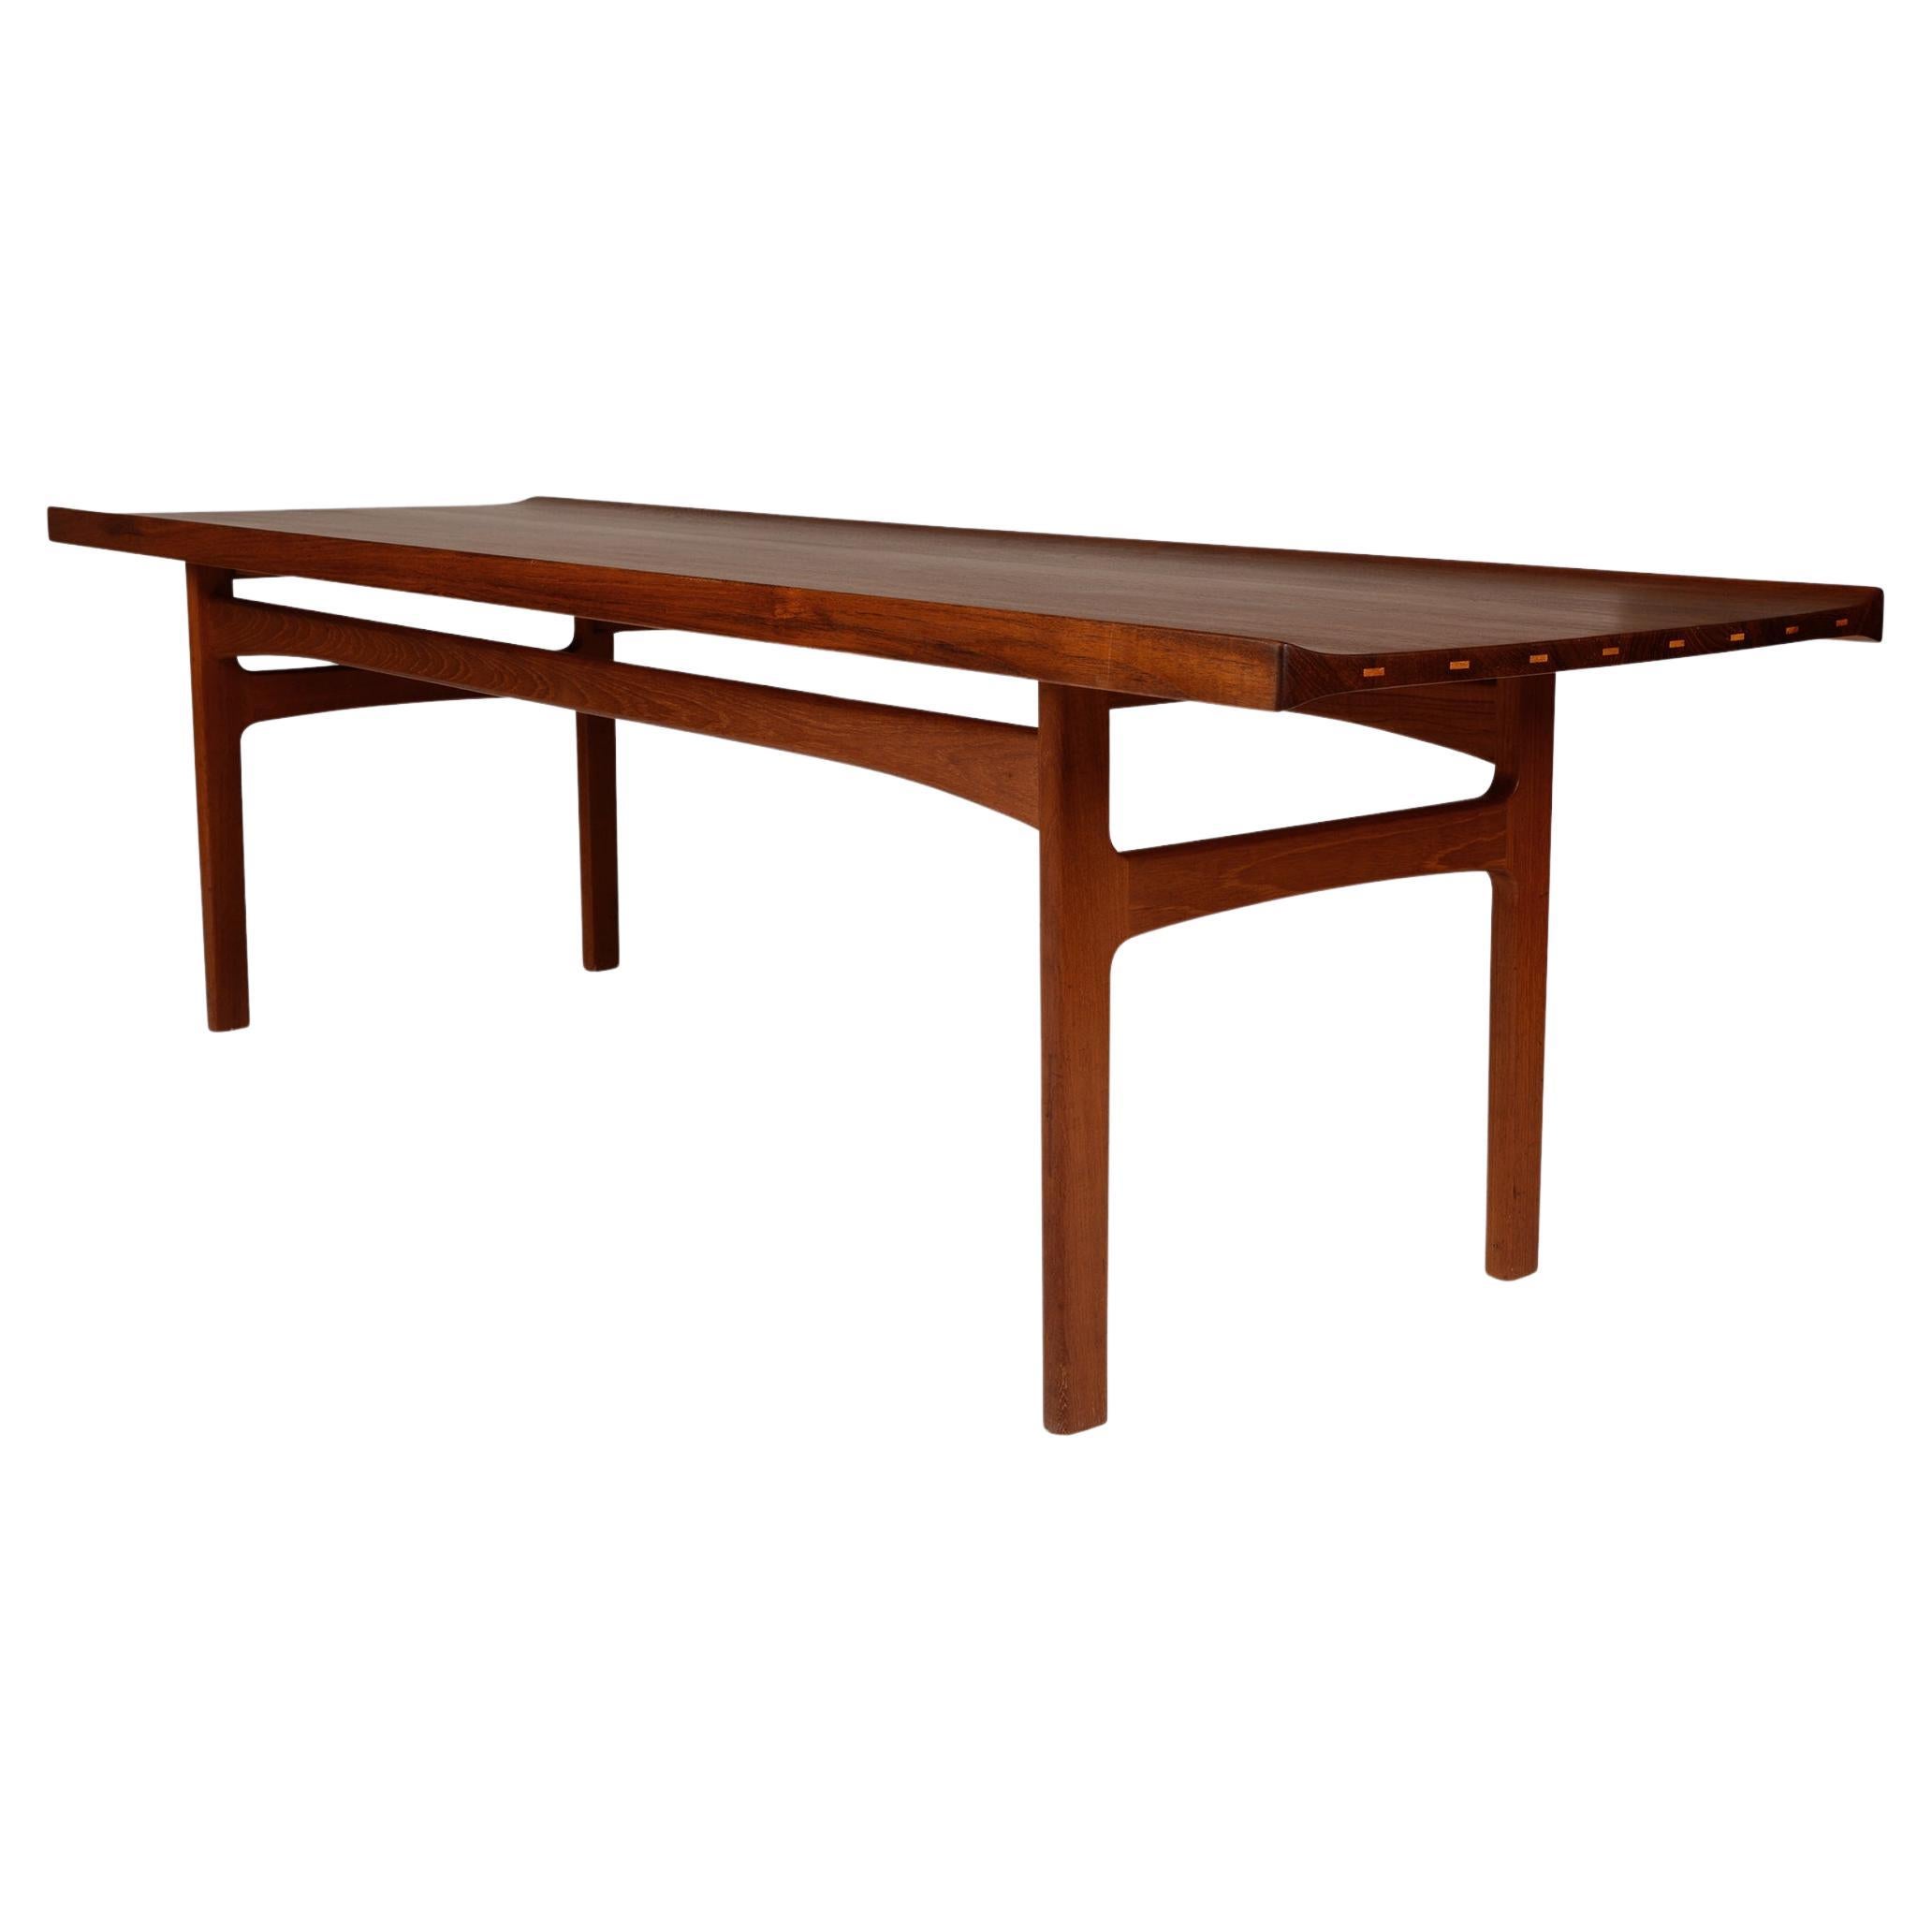 Danish modern larger teak coffee table with contrasting birch details For Sale